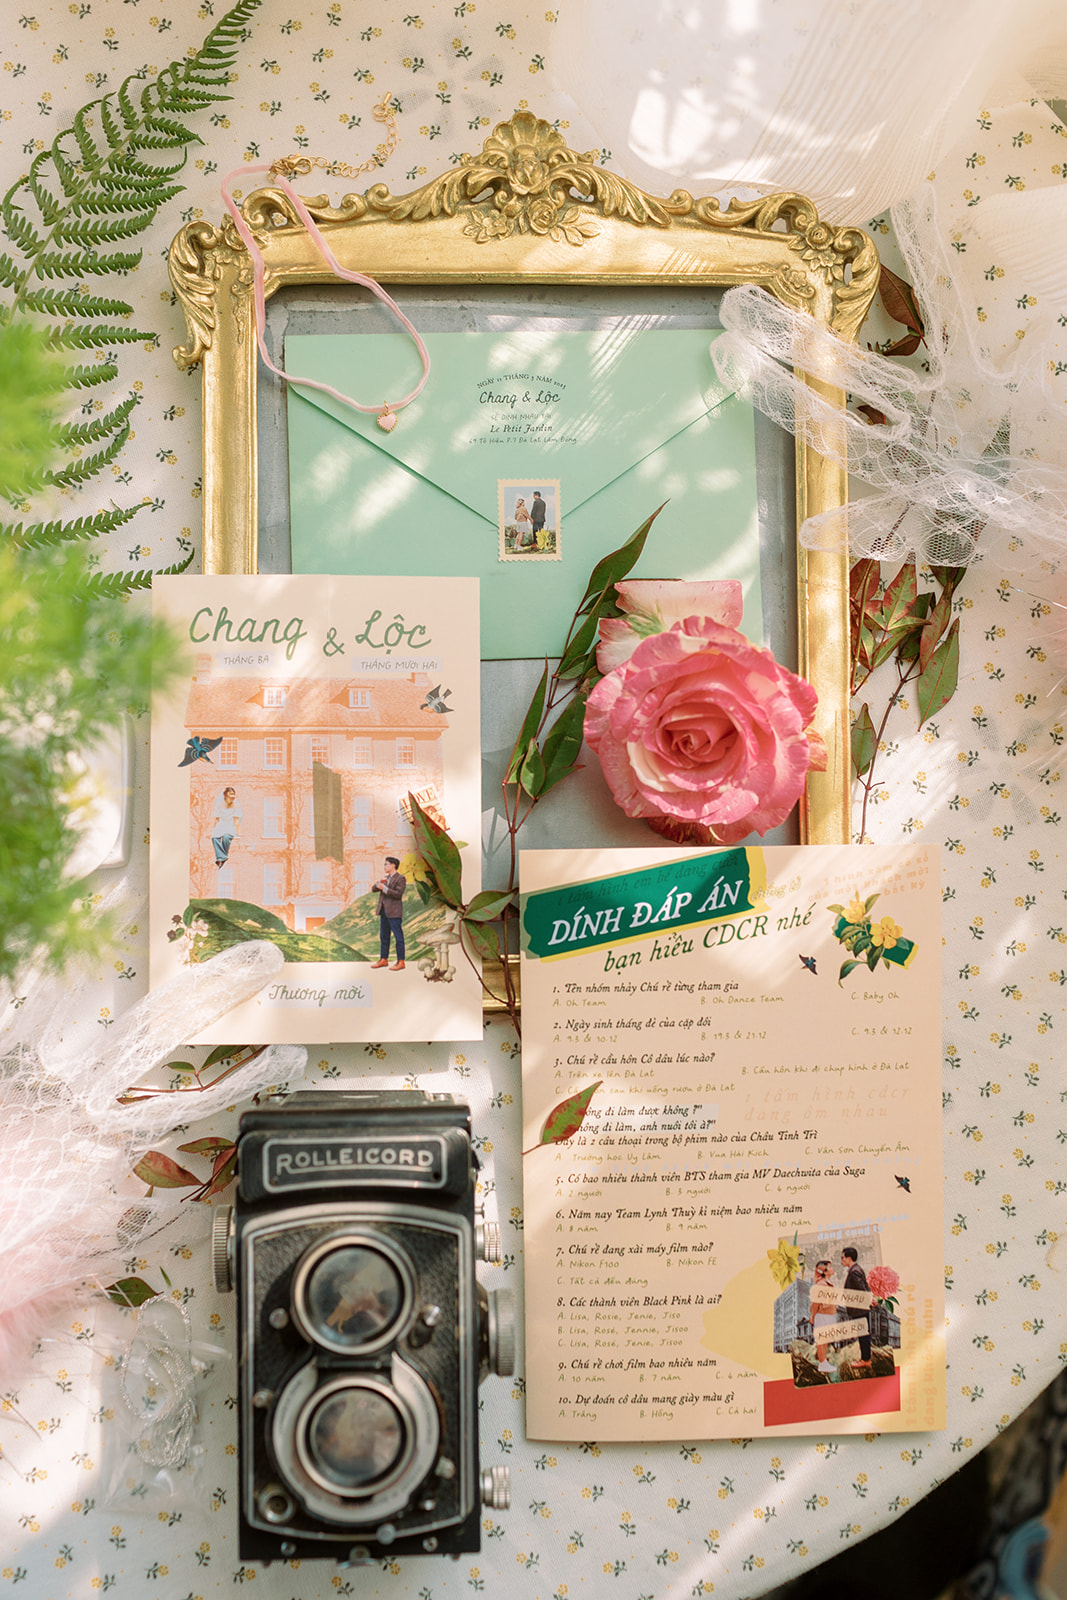 Wedding stationeries of an analog film lover couple in Dalat